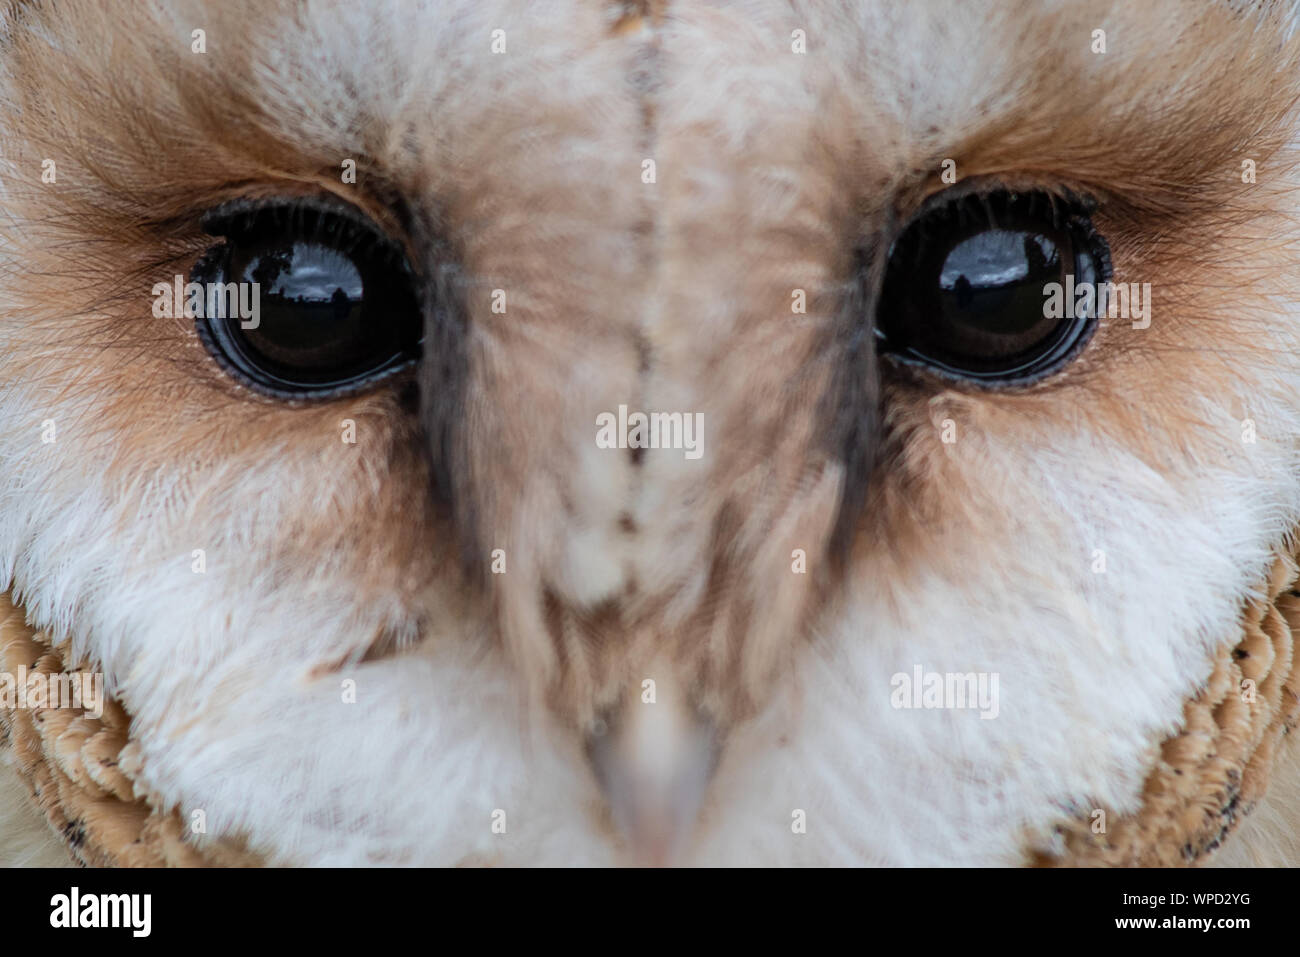 a very close up portrait of the eyes of a barn owl intensely staring forward at the camera Stock Photo